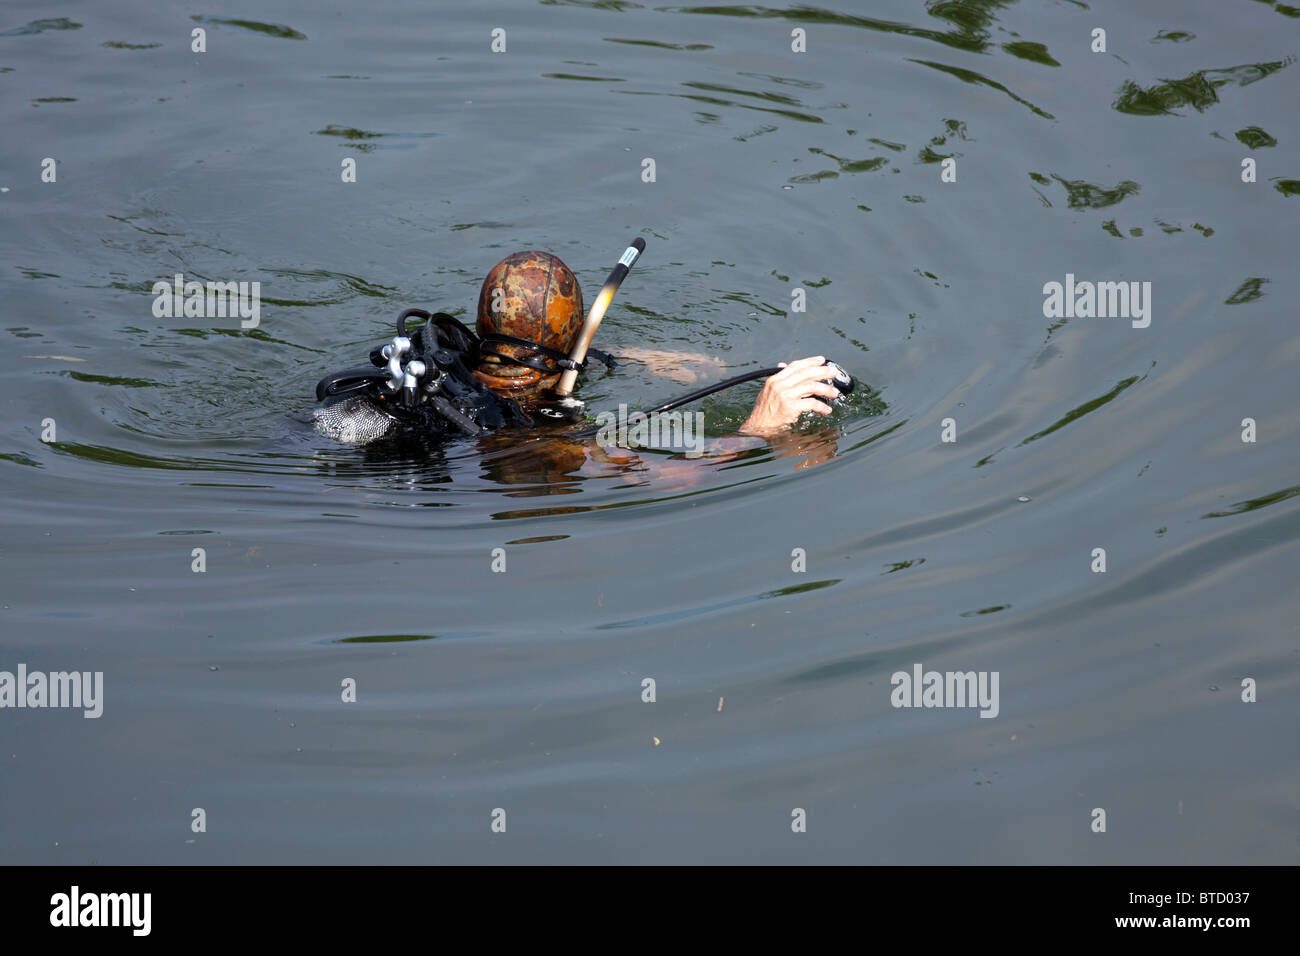 Underwater diver in military clothes in the water. Stock Photo